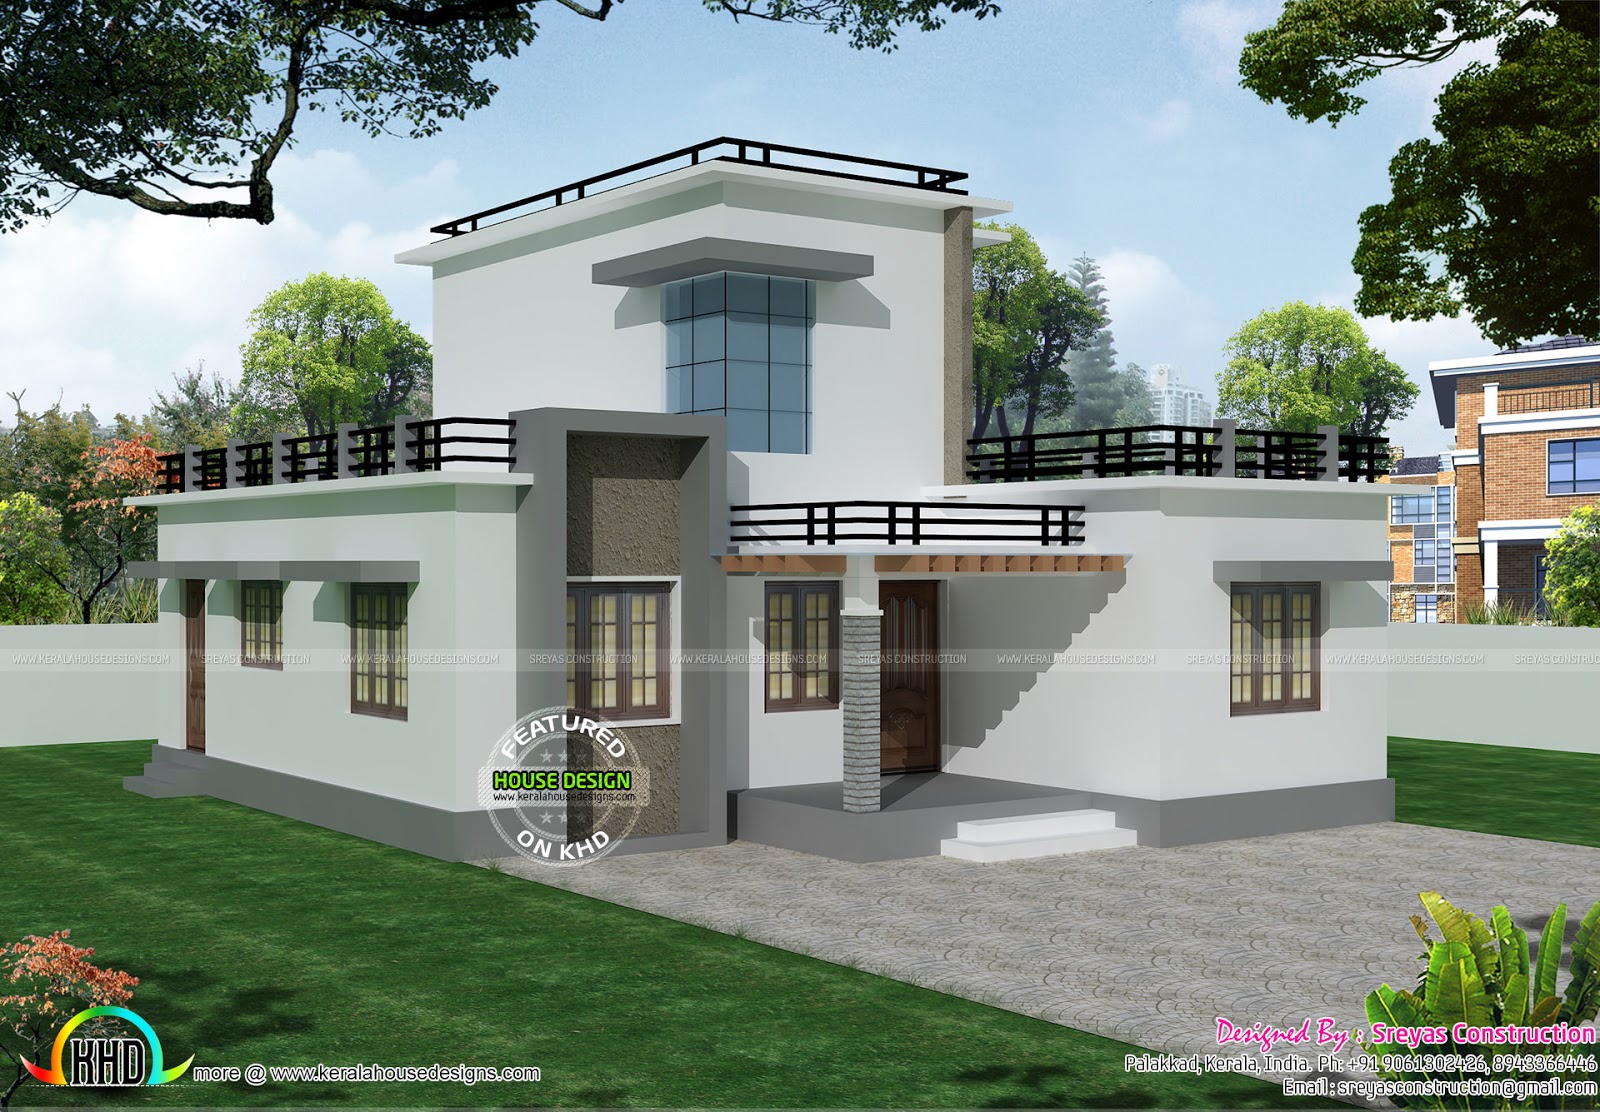 Small house 1300 sq-ft - Kerala home design and floor plans - 8000+ houses